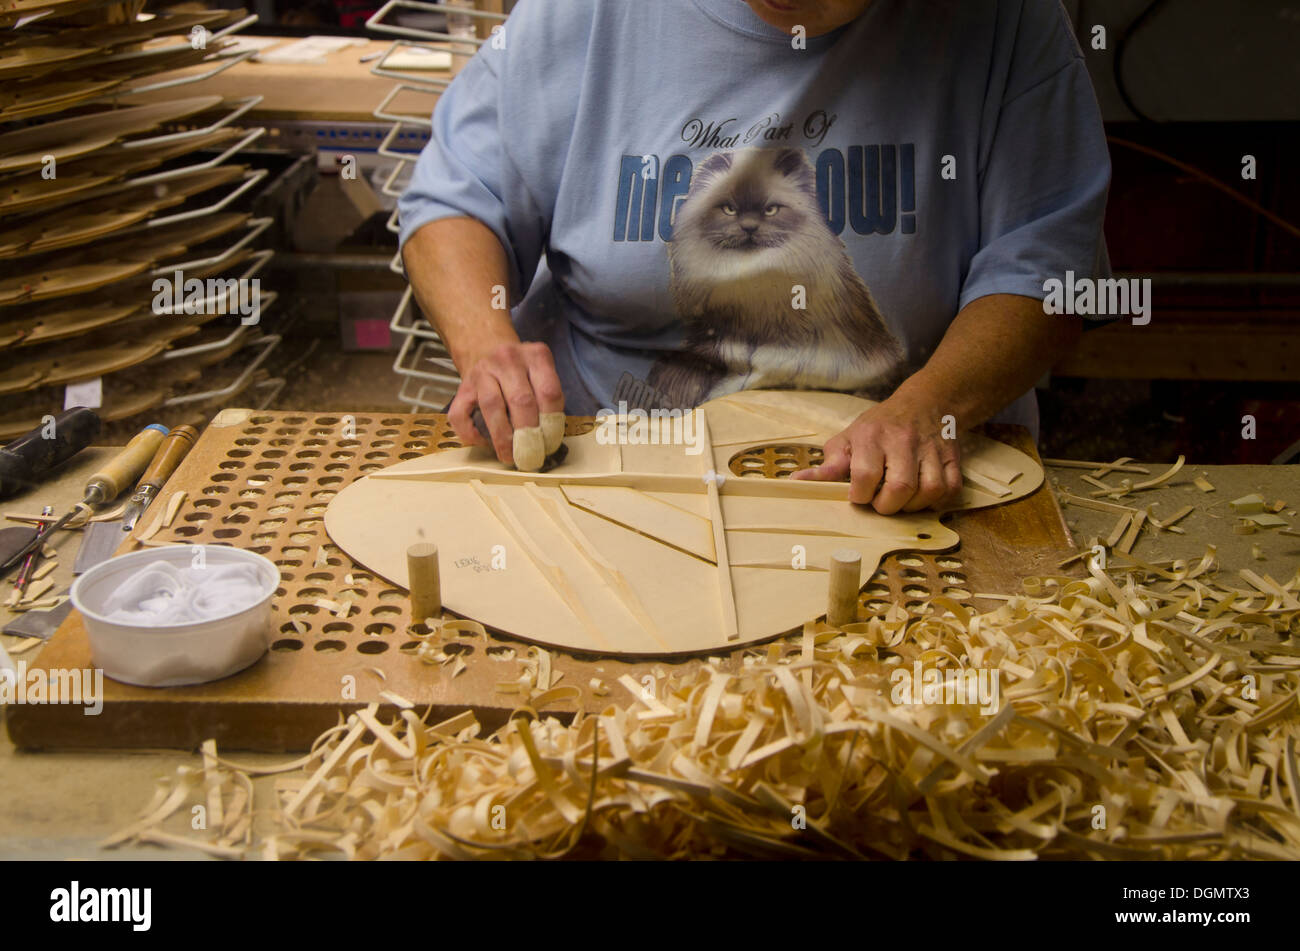 Gluing of the bracings the during production process at Martin guitars factory in Nazareth, Pennsylvania, USA Stock Photo